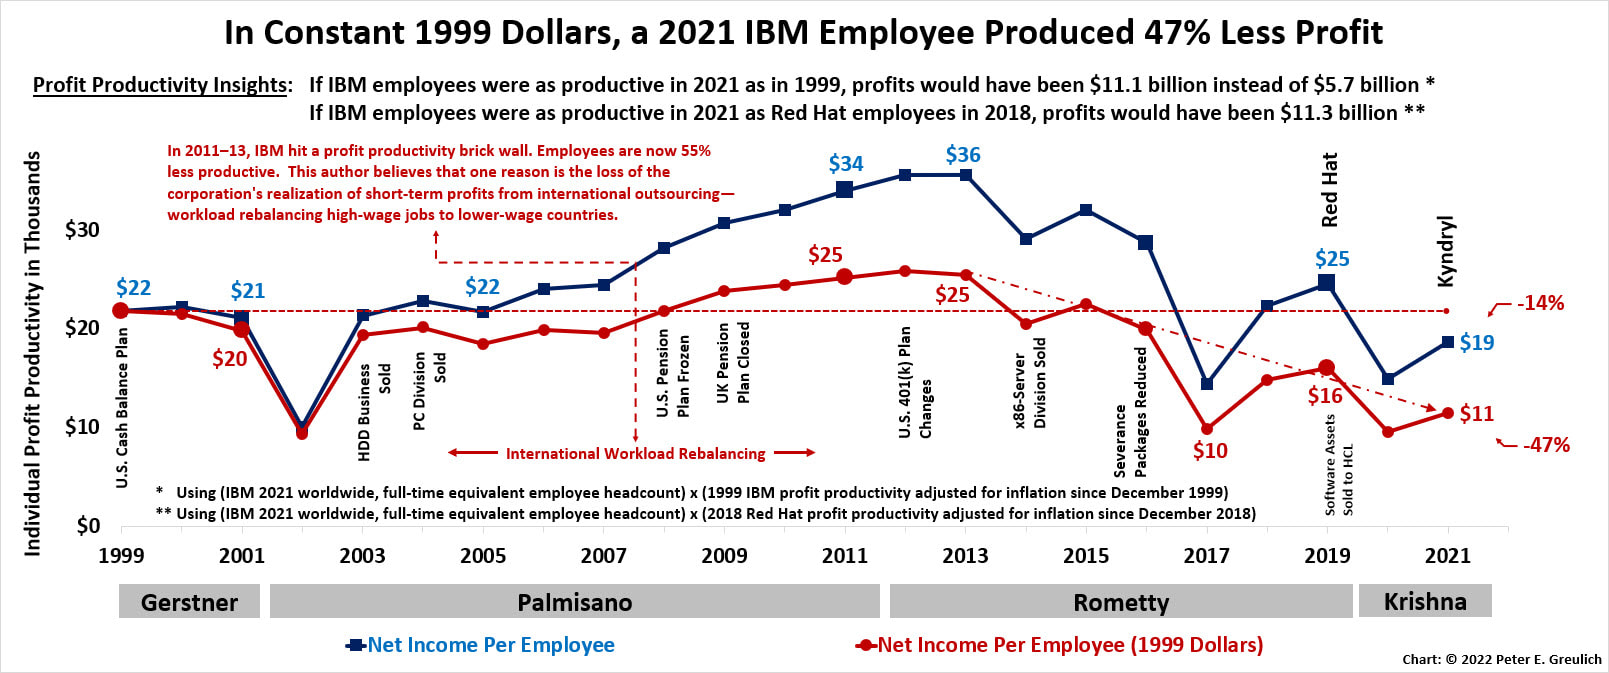 Line graph showing IBM net income (profit) productivity falling from 1999 to 2020: Gerstner, Palmisano, Rometty and Krishna